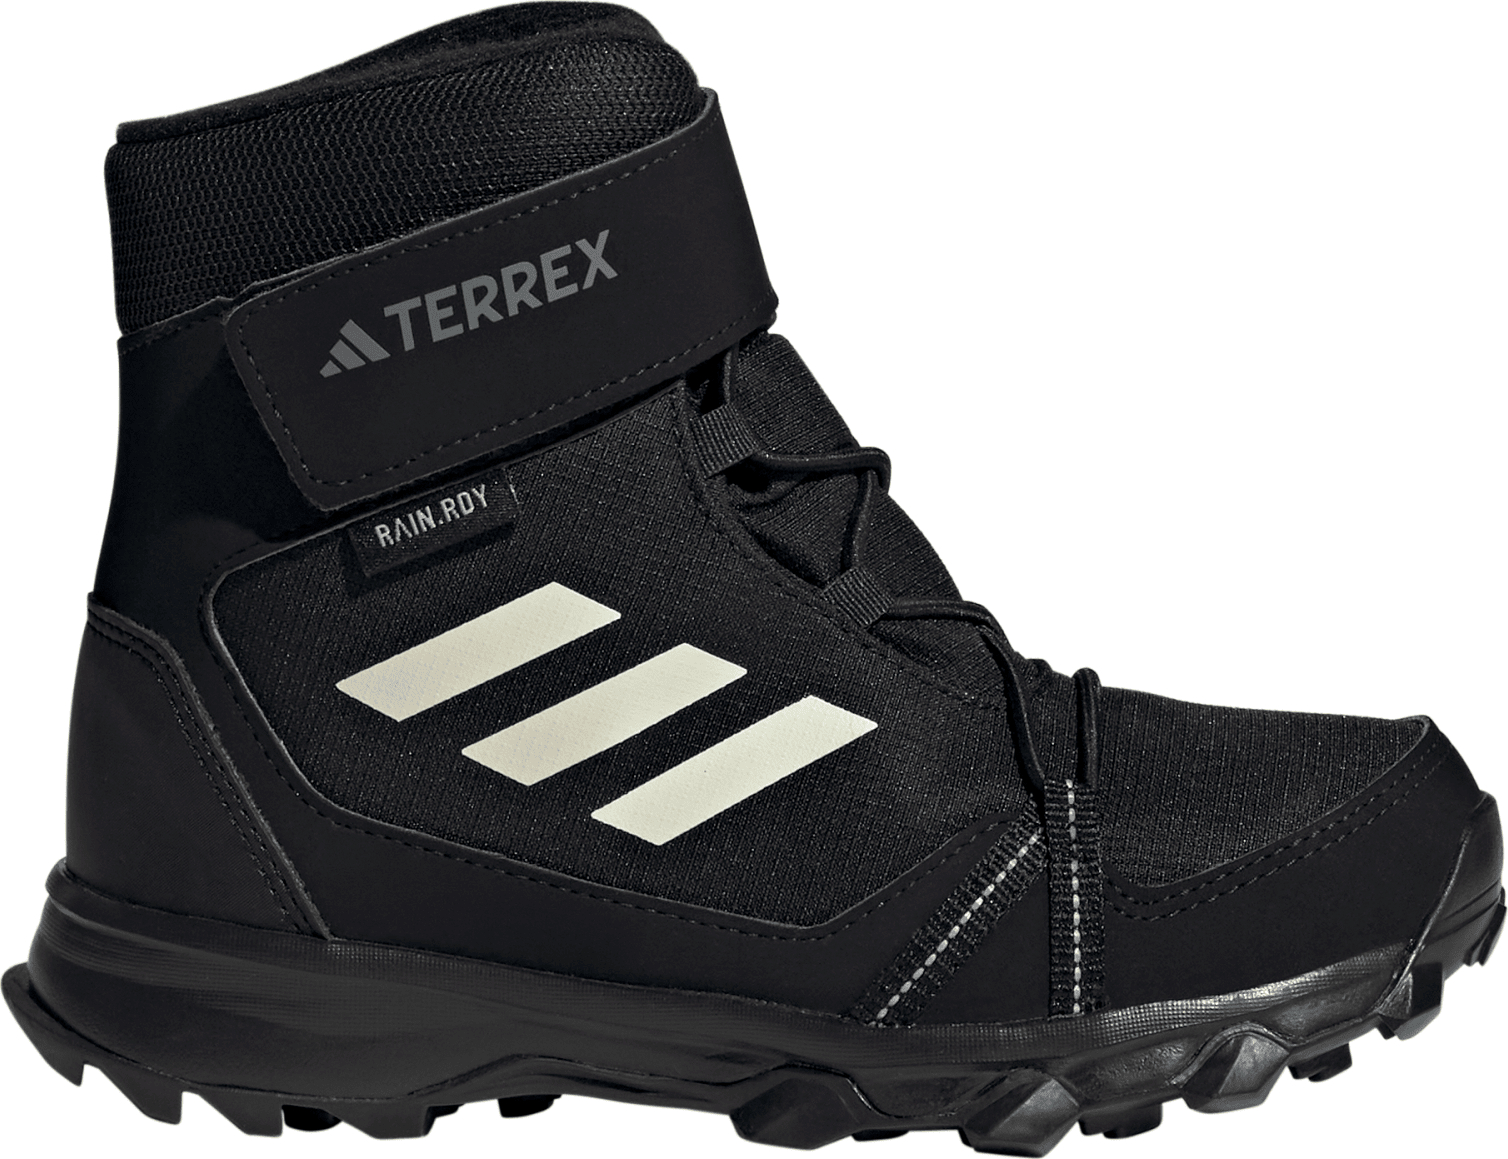 Kids’ Terrex Snow Hook-and-Loop COLD.RDY Winter Shoes Cblack/Cwhite/Grefou